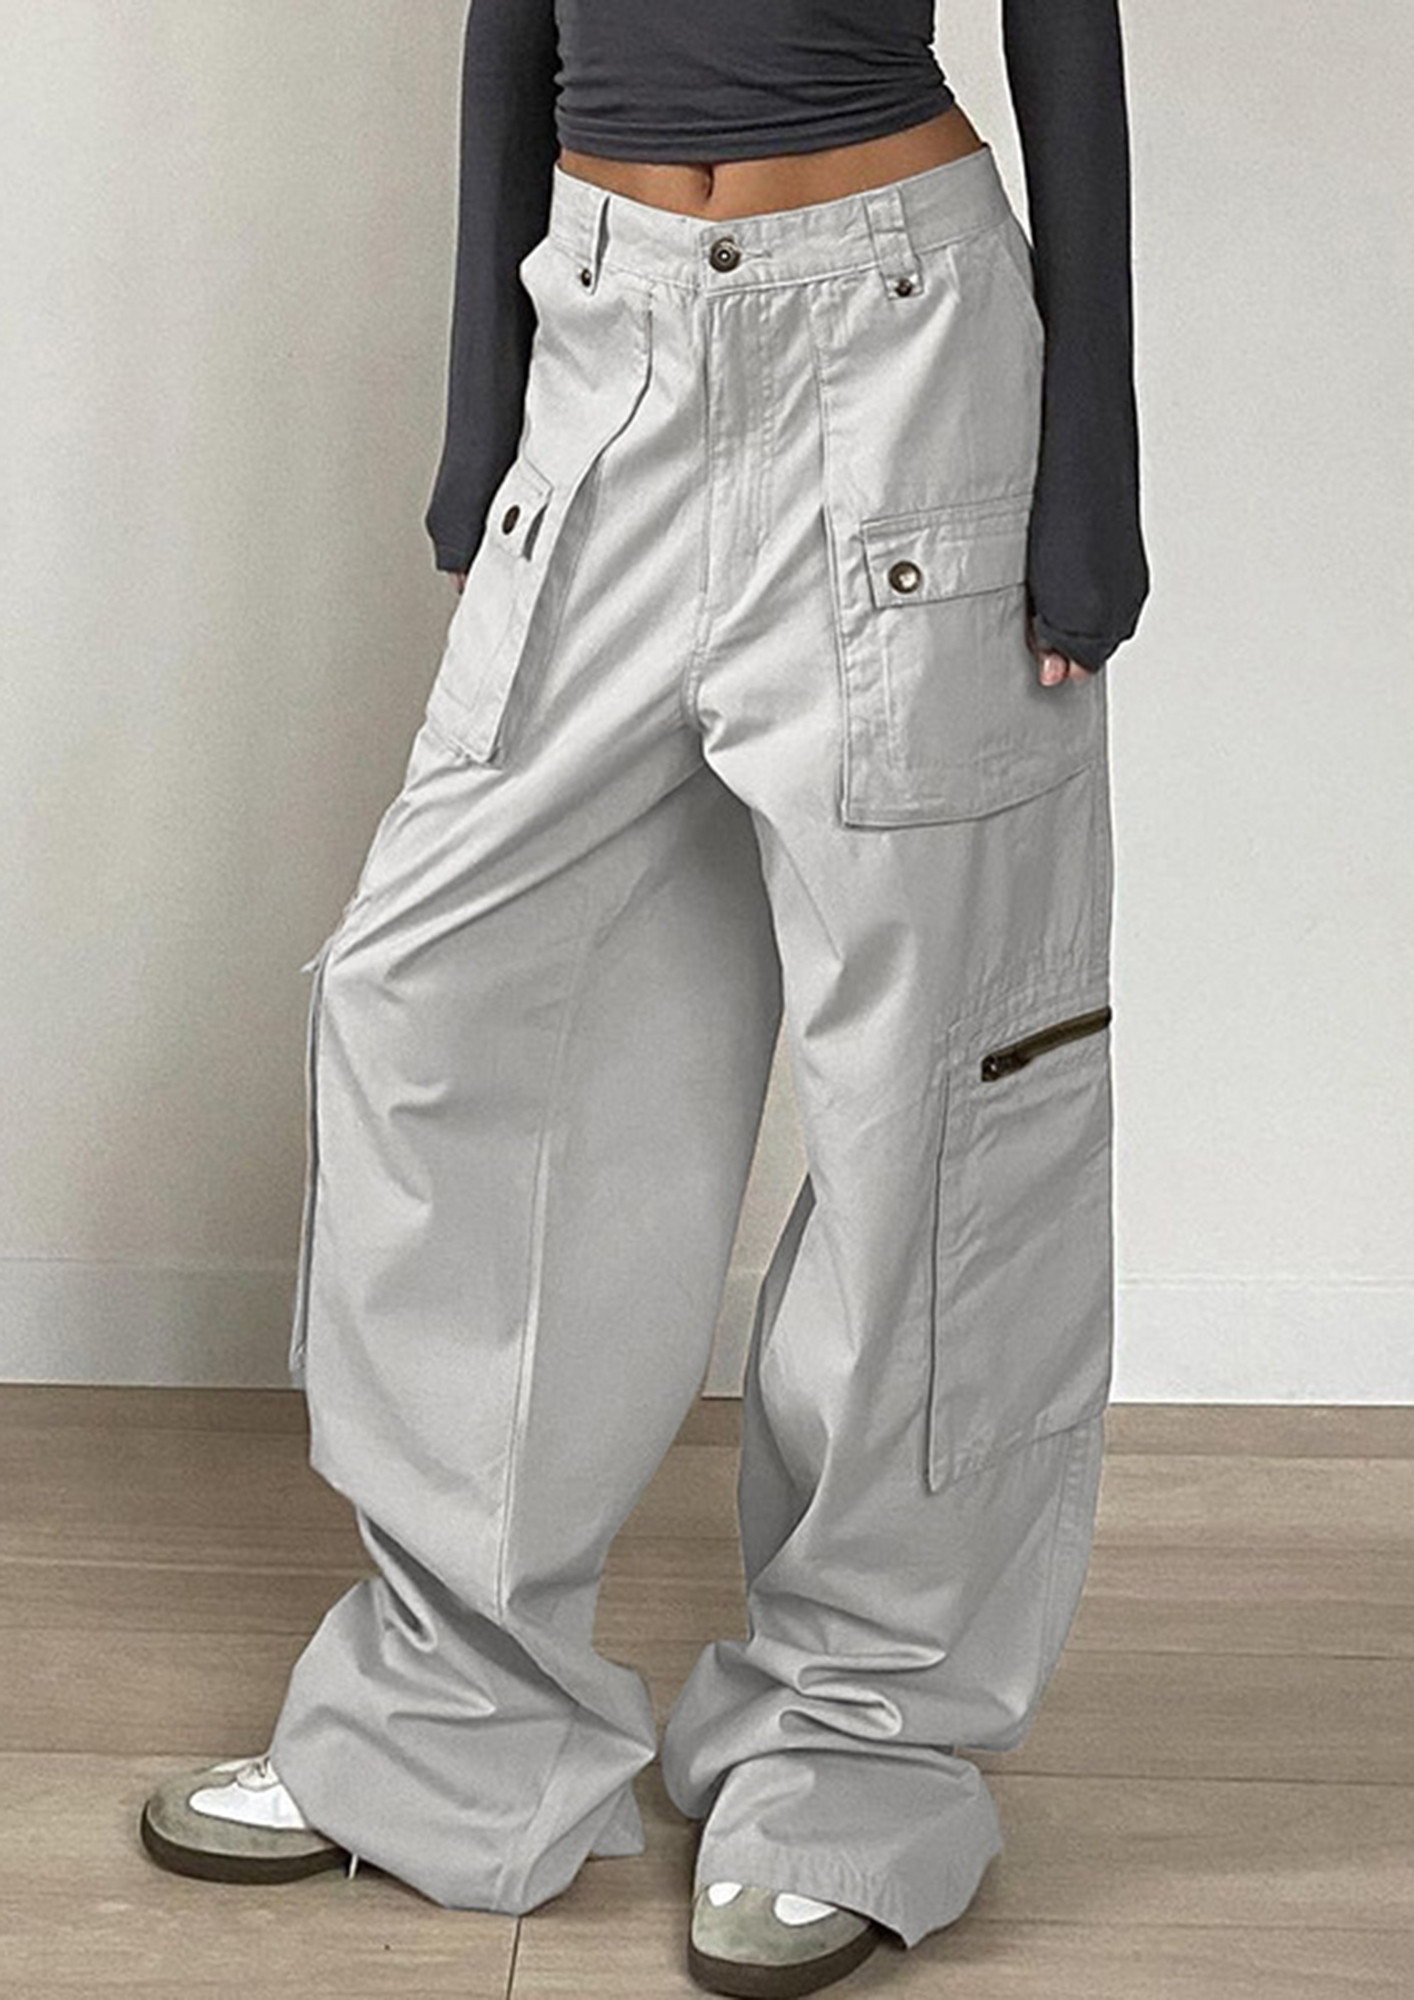 Experience 135+ baggy cargo pants